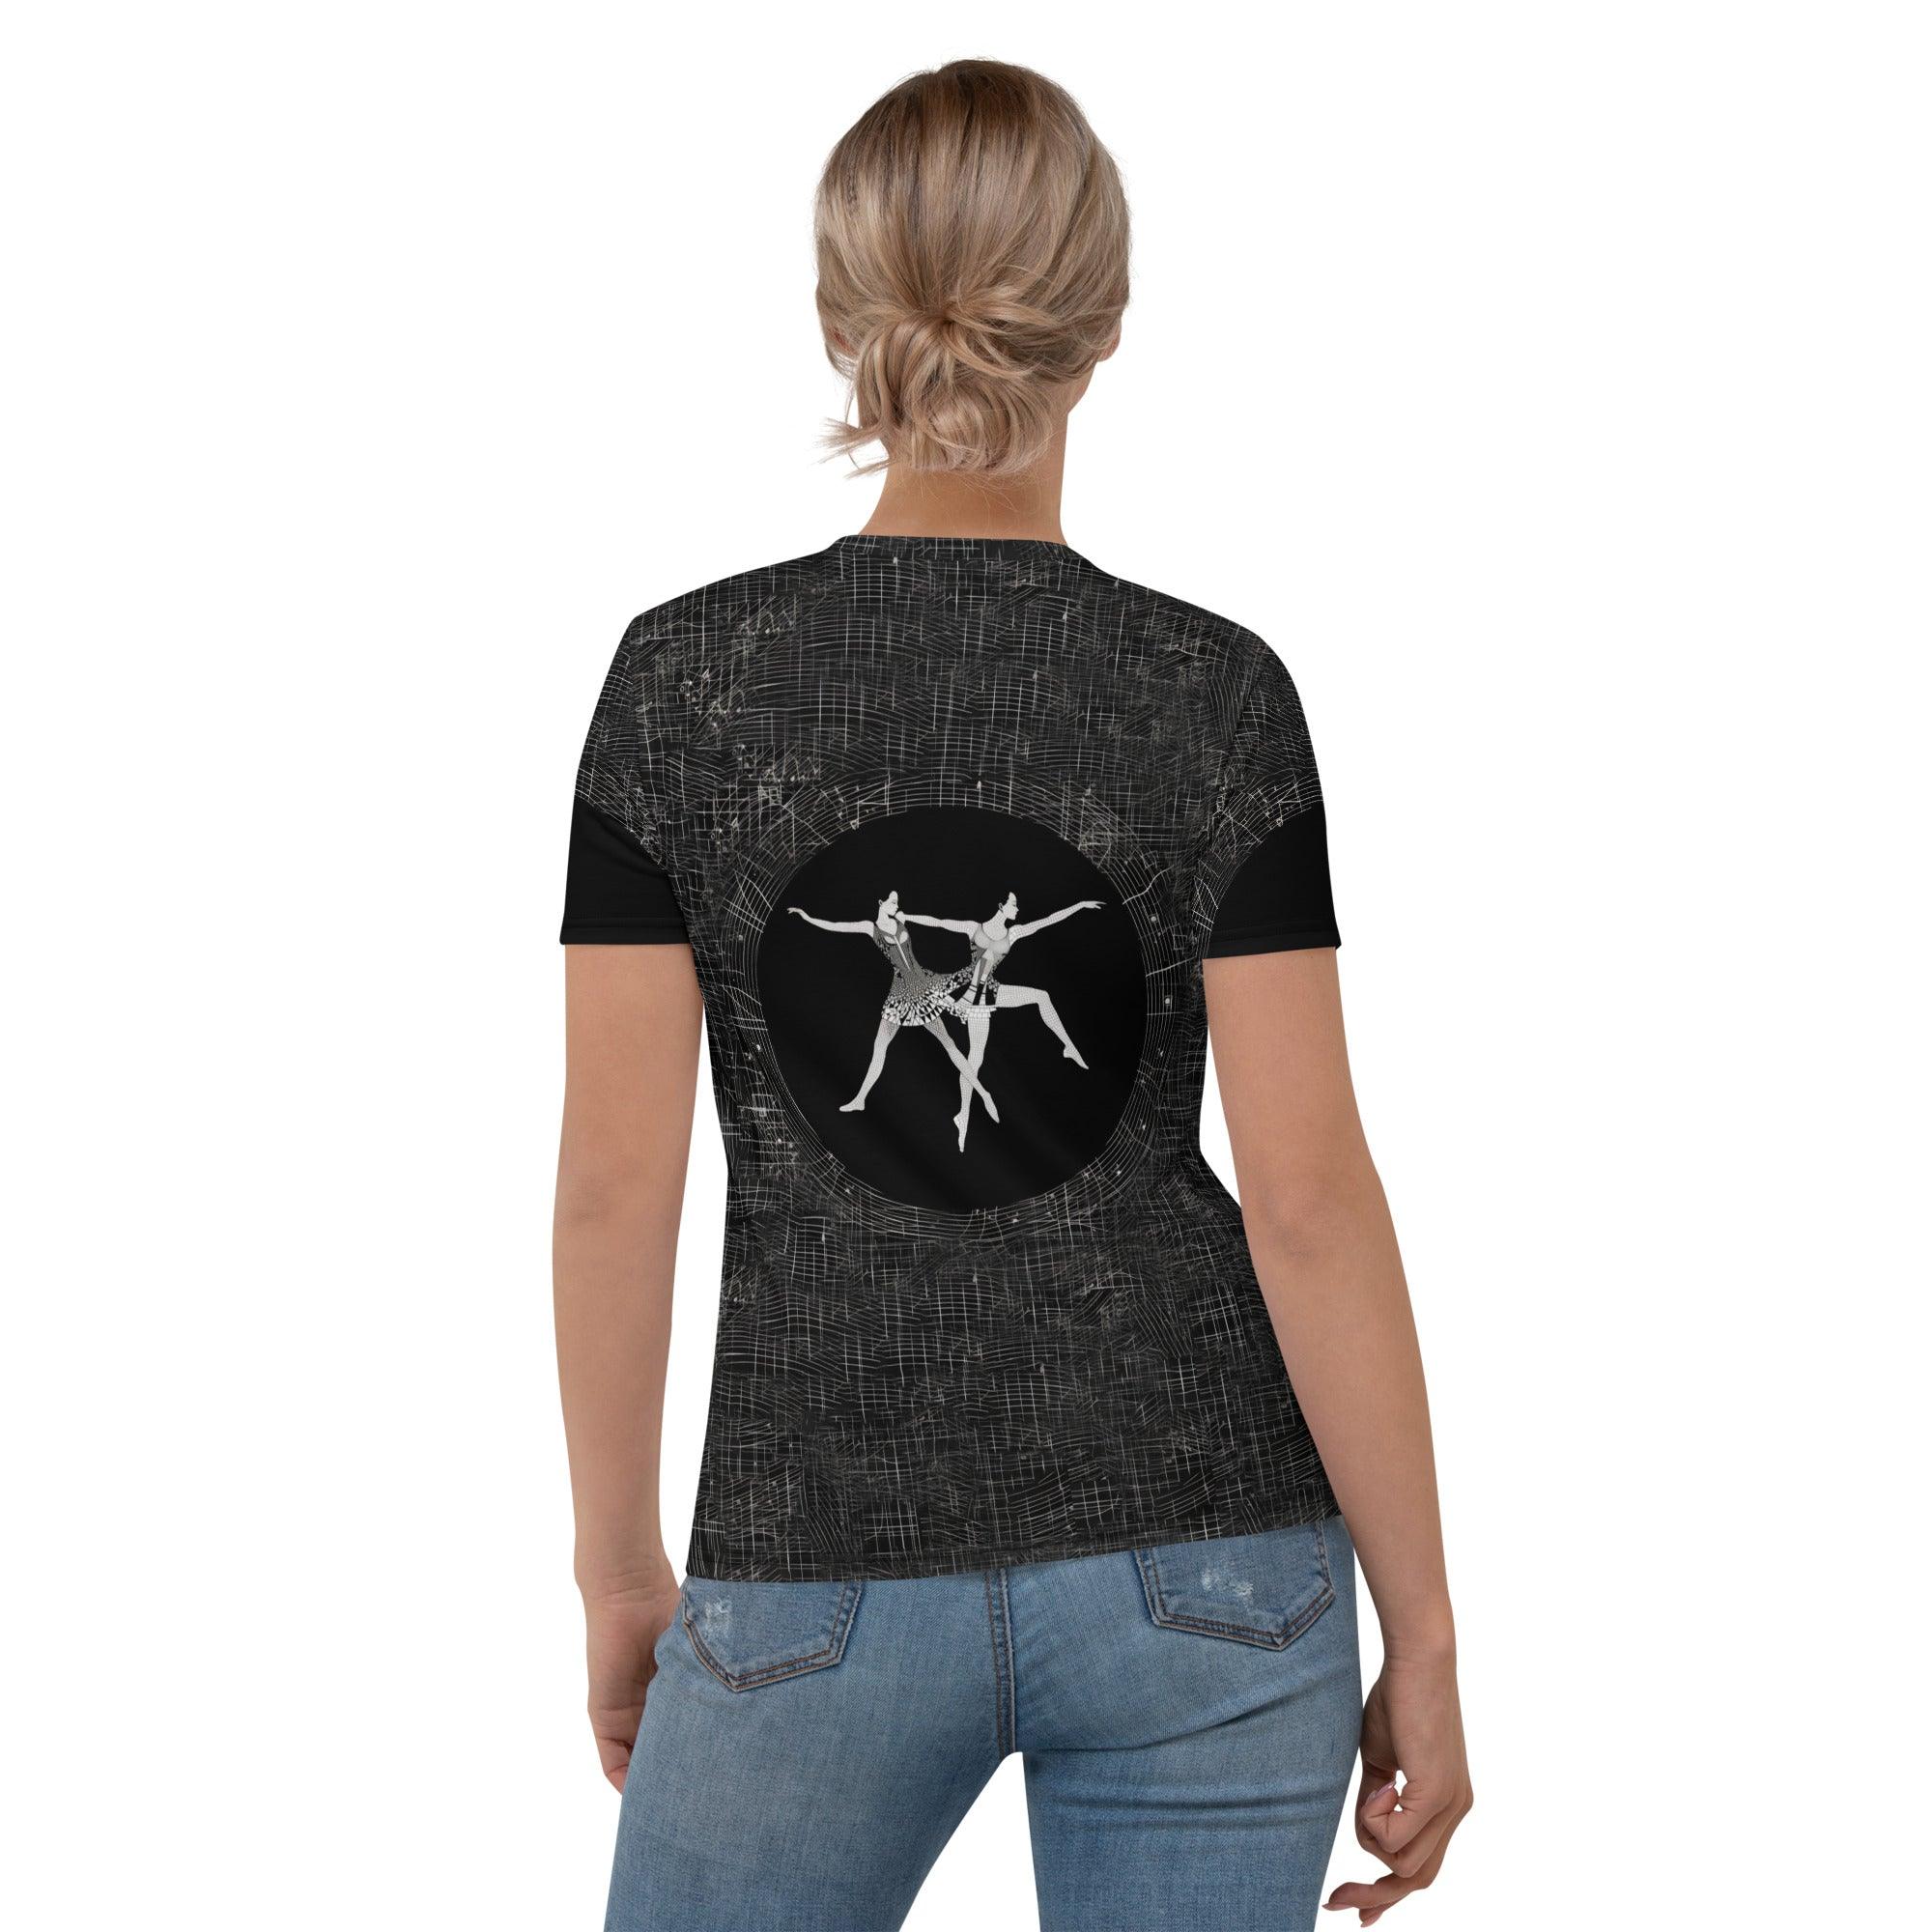 Comfortable Women's T-shirt for Aerial Dance enthusiasts.